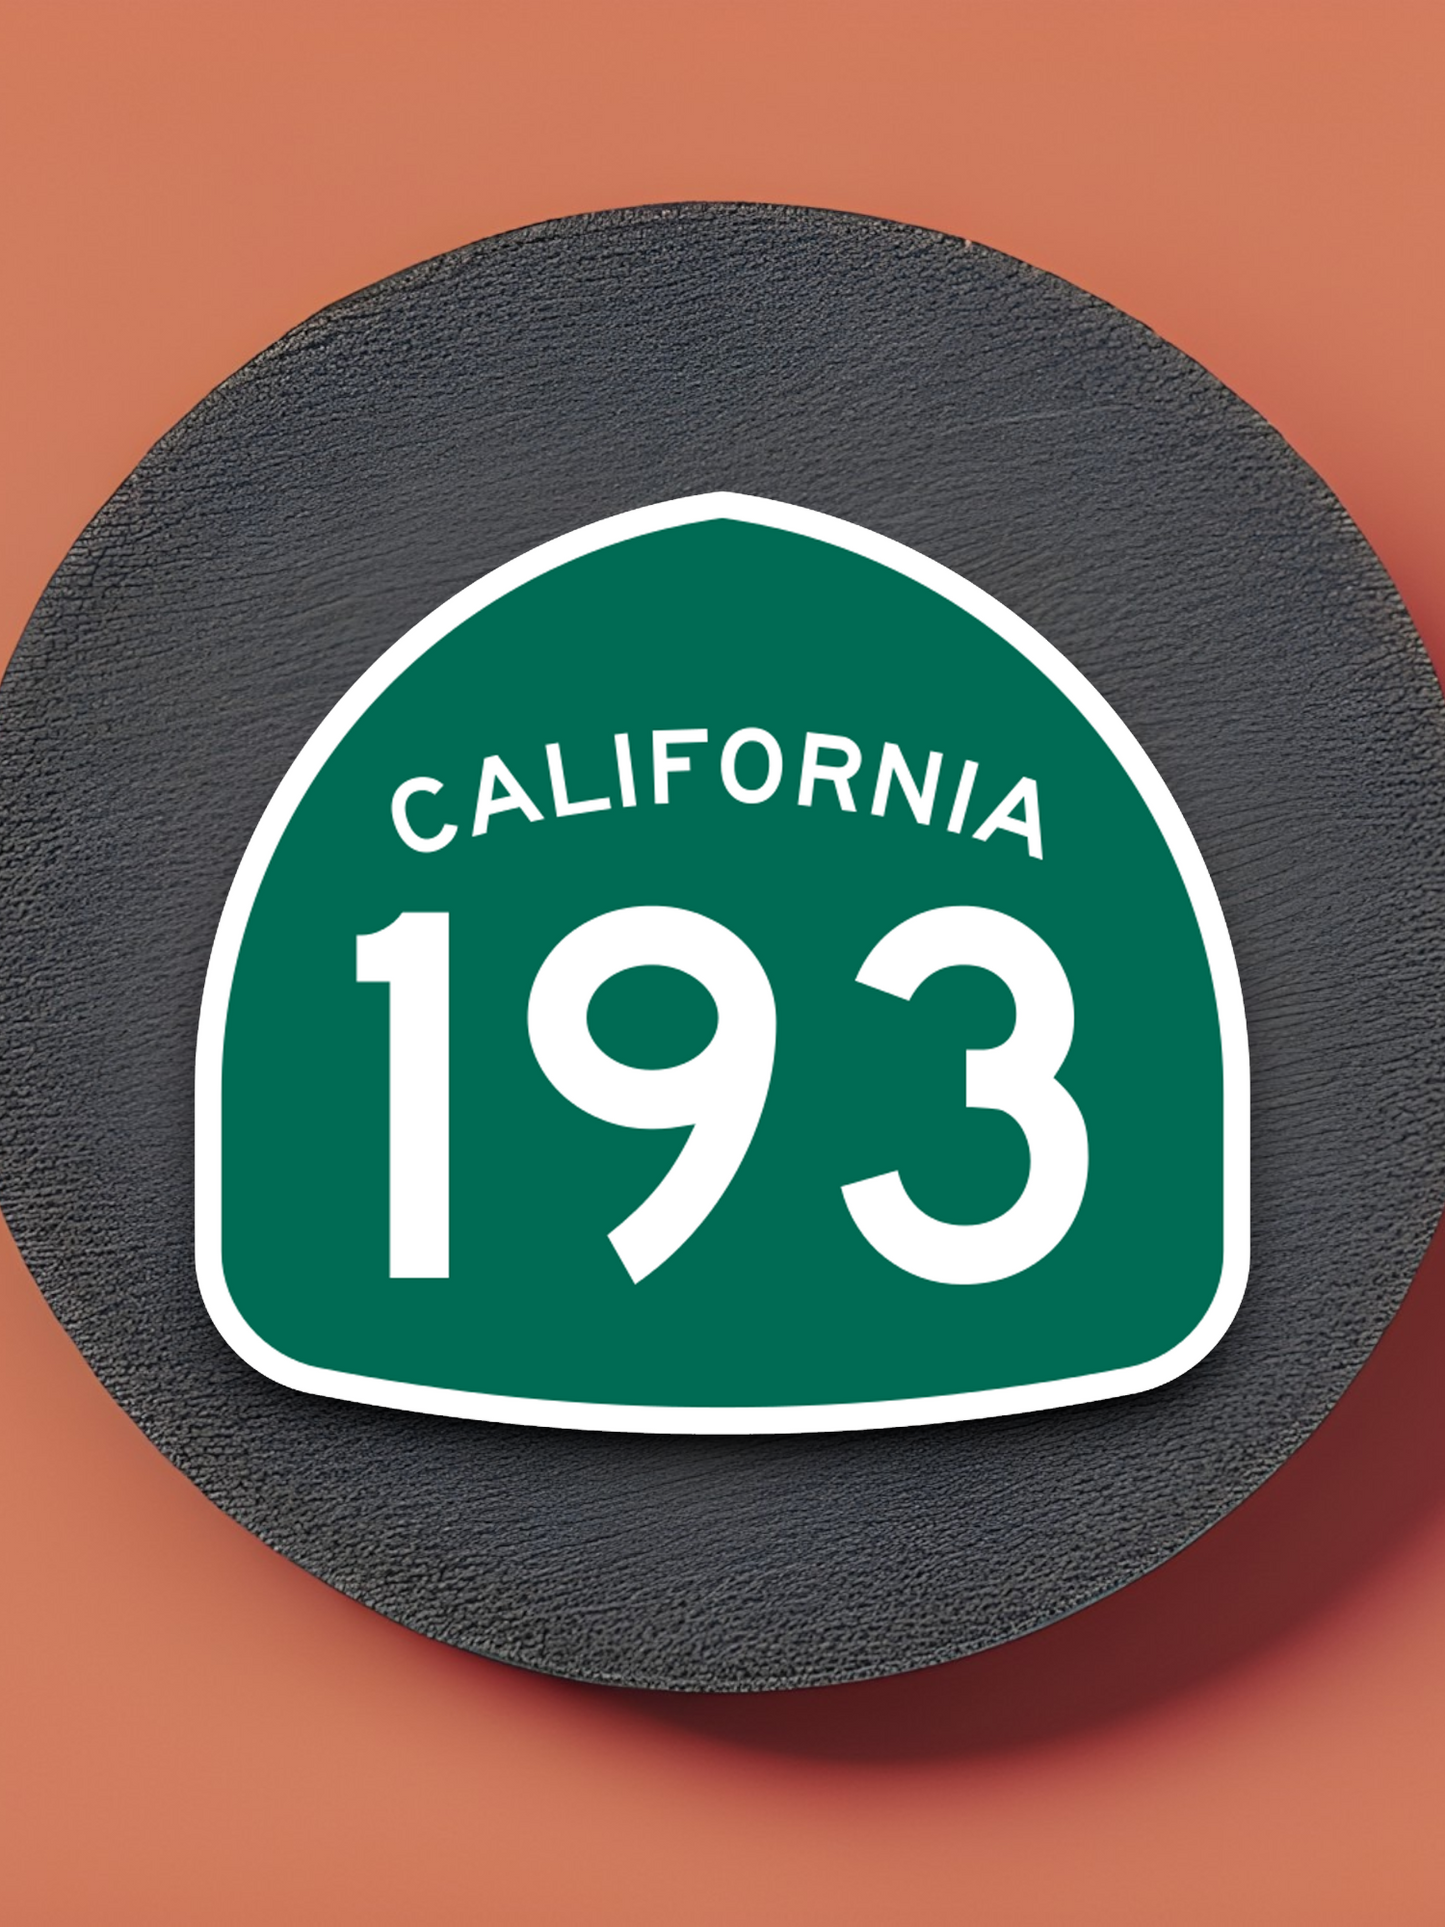 California State Route 193 Road Sign Sticker